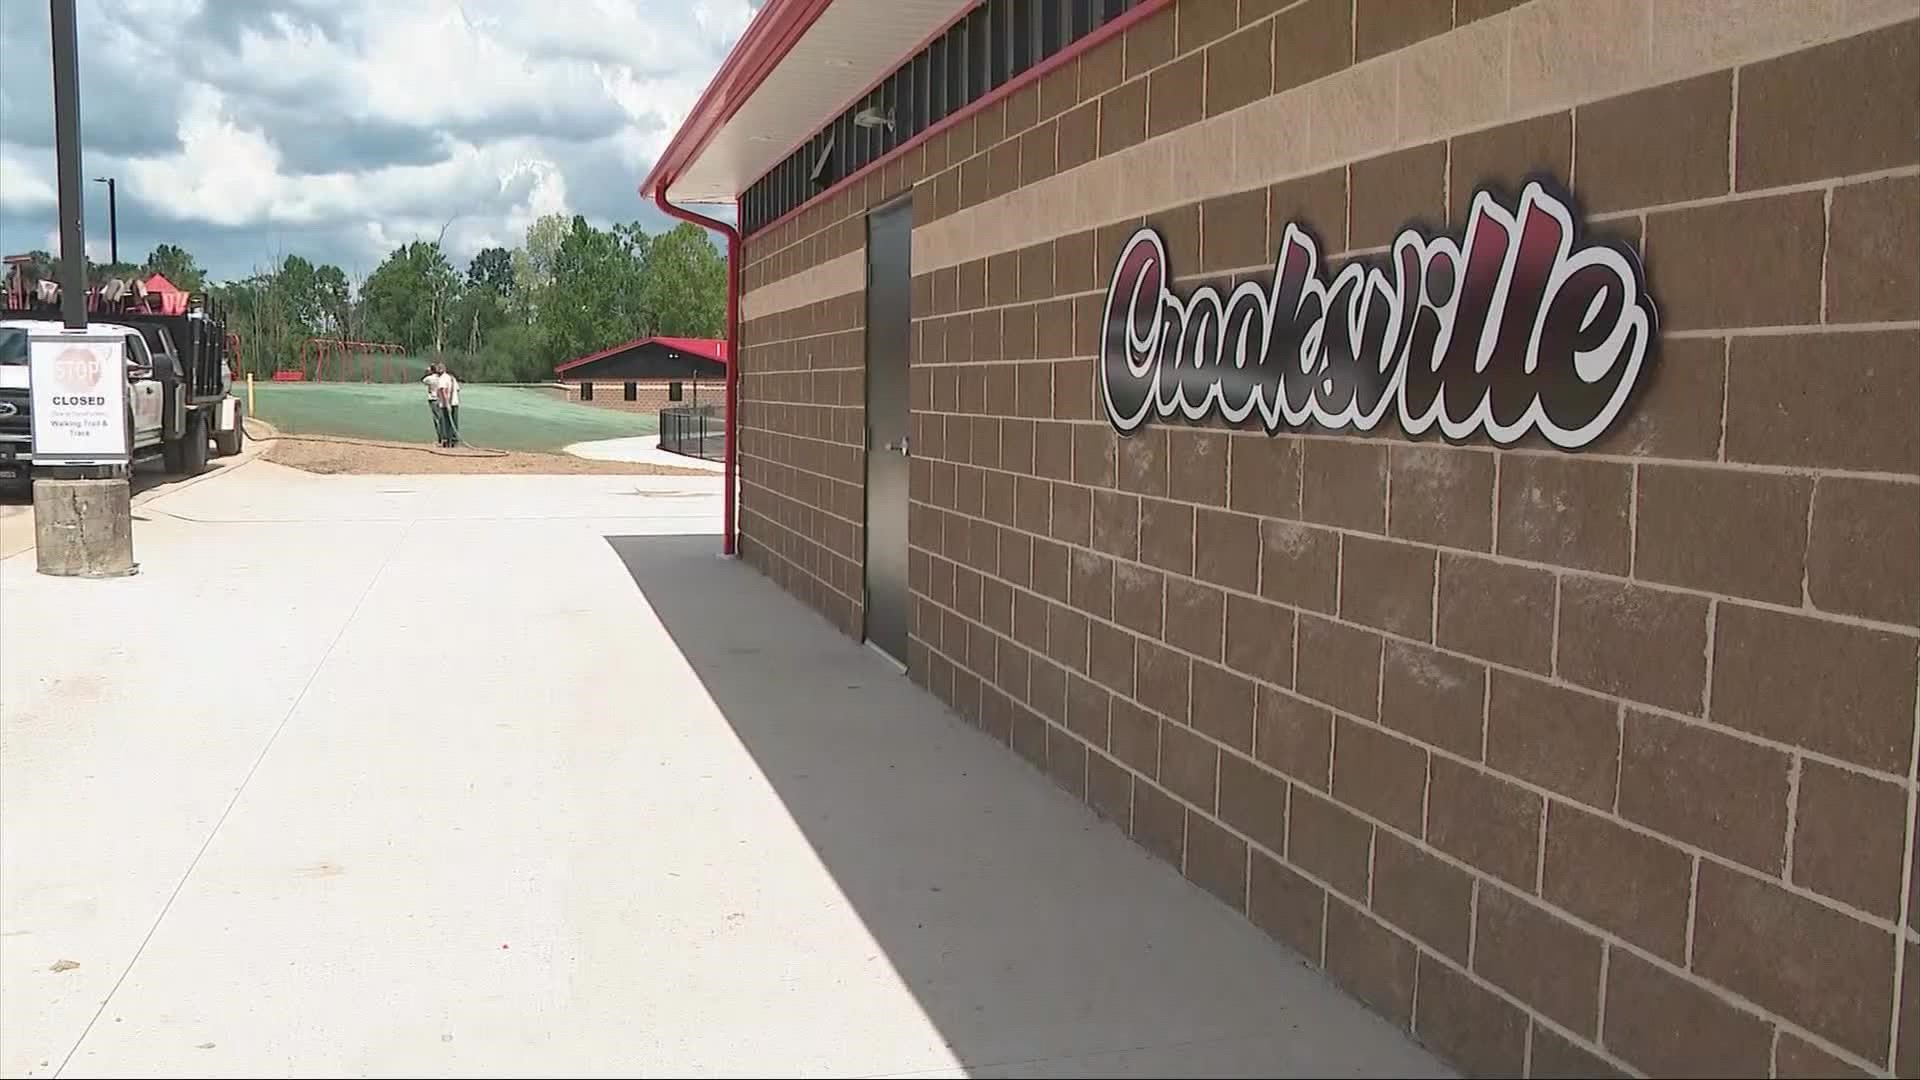 Crooksville is unveiling a new stadium on Friday after playing all of their games on the road last year.